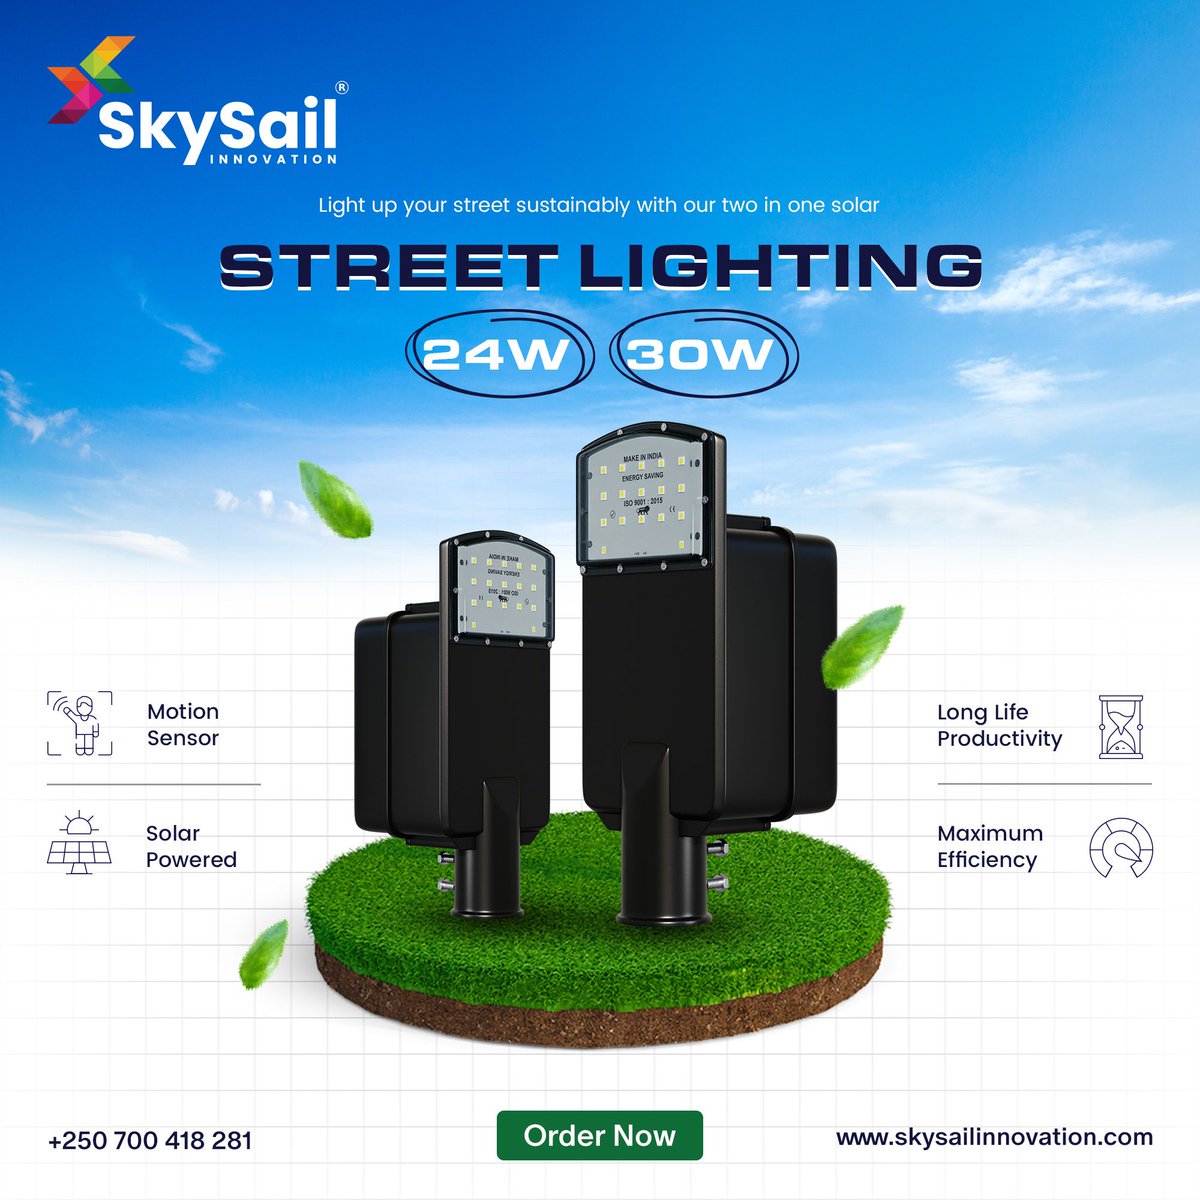 🌟 Light up your street sustainably with SkySail Innovation's two-in-one Solar Street Lighting 24W and 30W! 🌞 Illuminate your community while reducing carbon footprint. Let's brighten the way to a greener future together! 💡 #SkySailInnovation #SolarStreetLighting